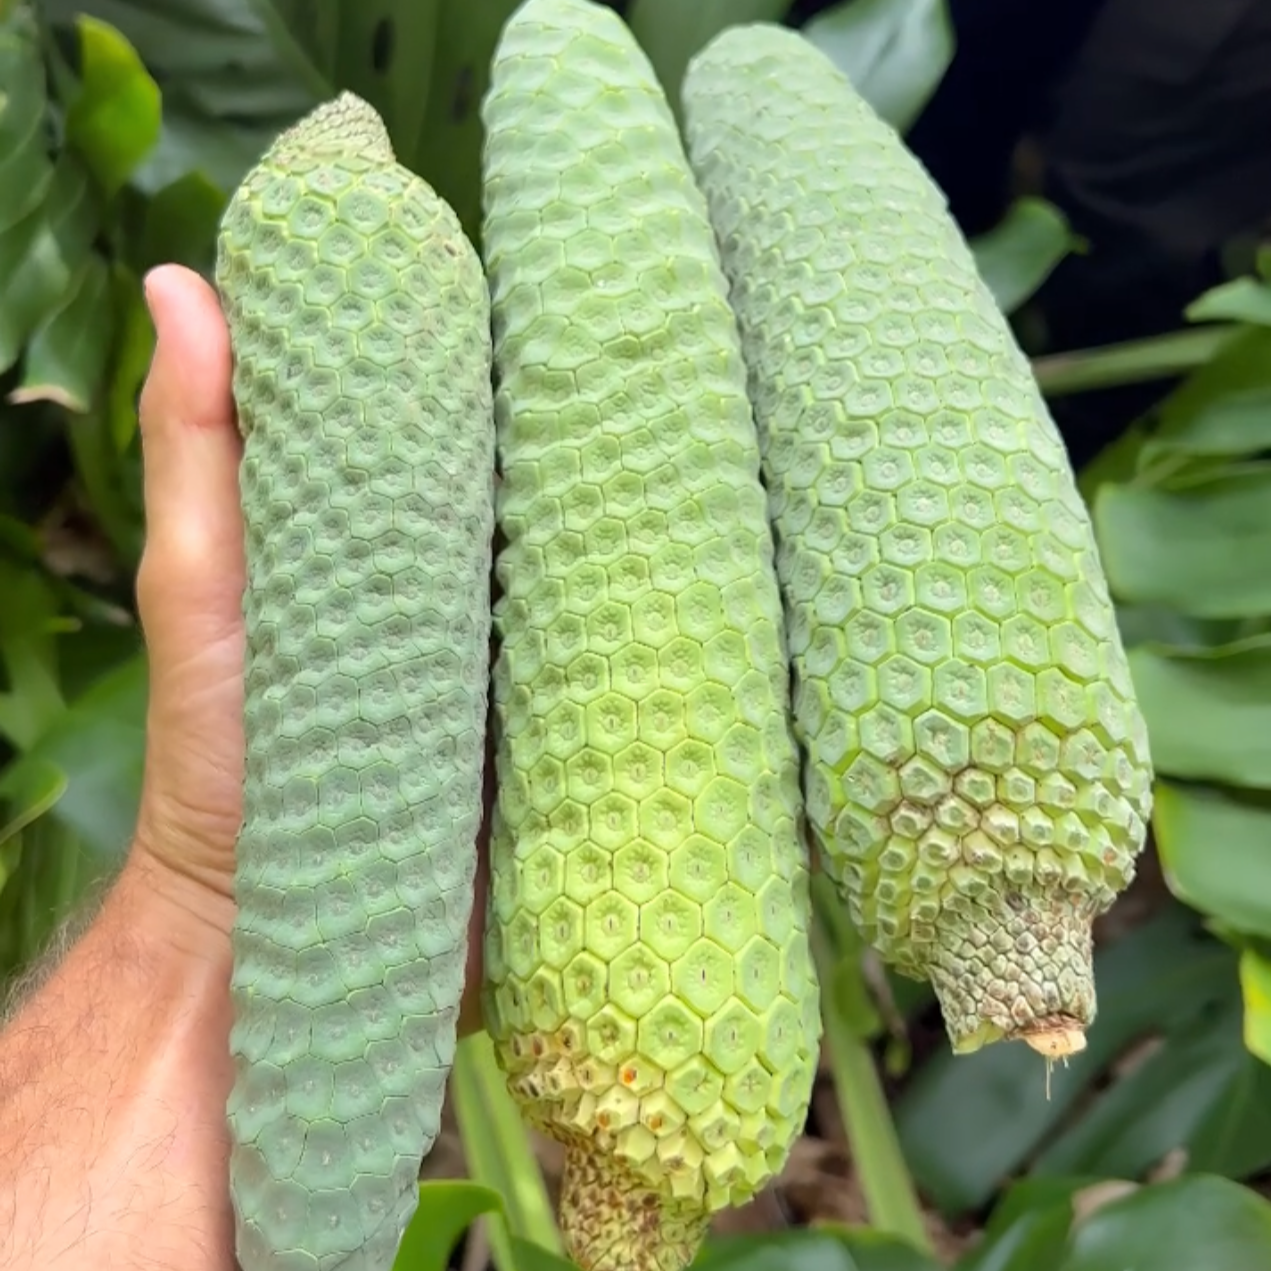 Monstera Deliciosa Fruit: 5 Things to Know About Eating It